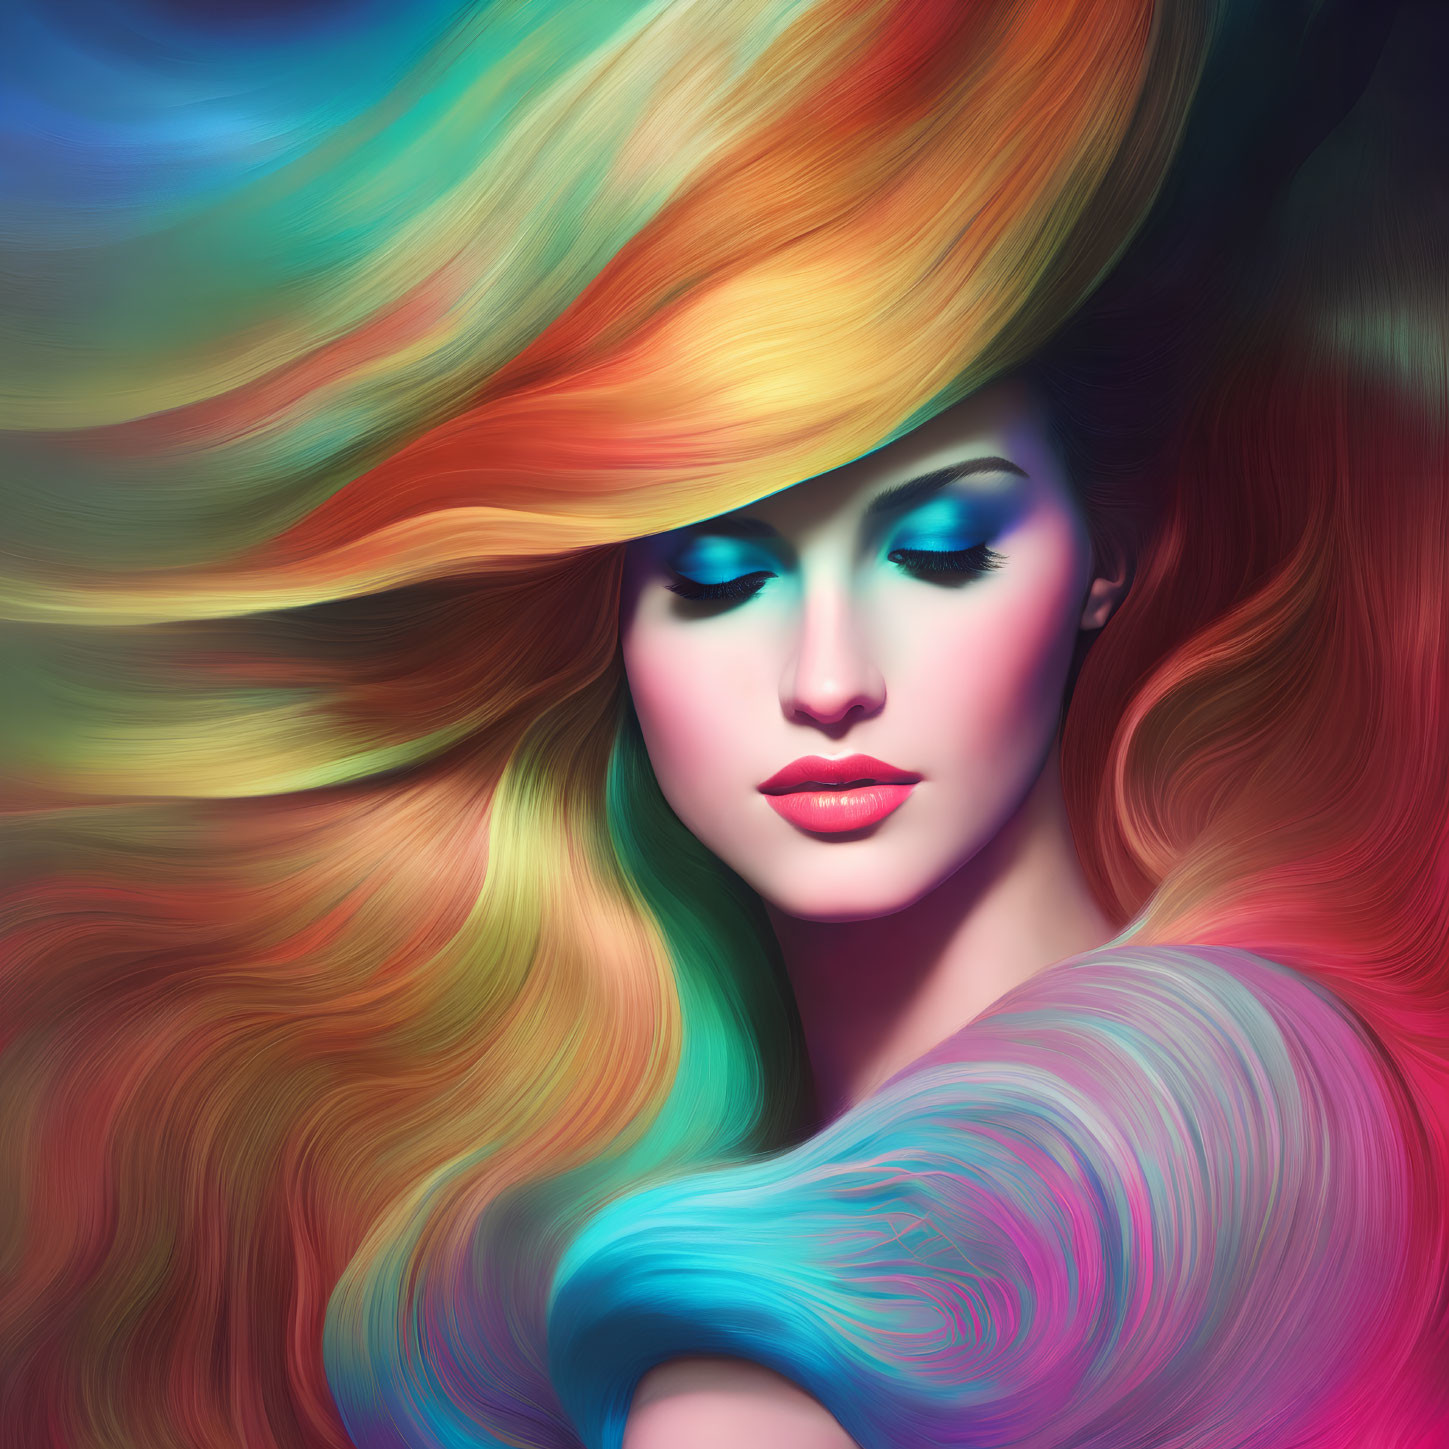 Colorful digital artwork of a woman with multicolored hair and a large hat, showcasing surreal blend